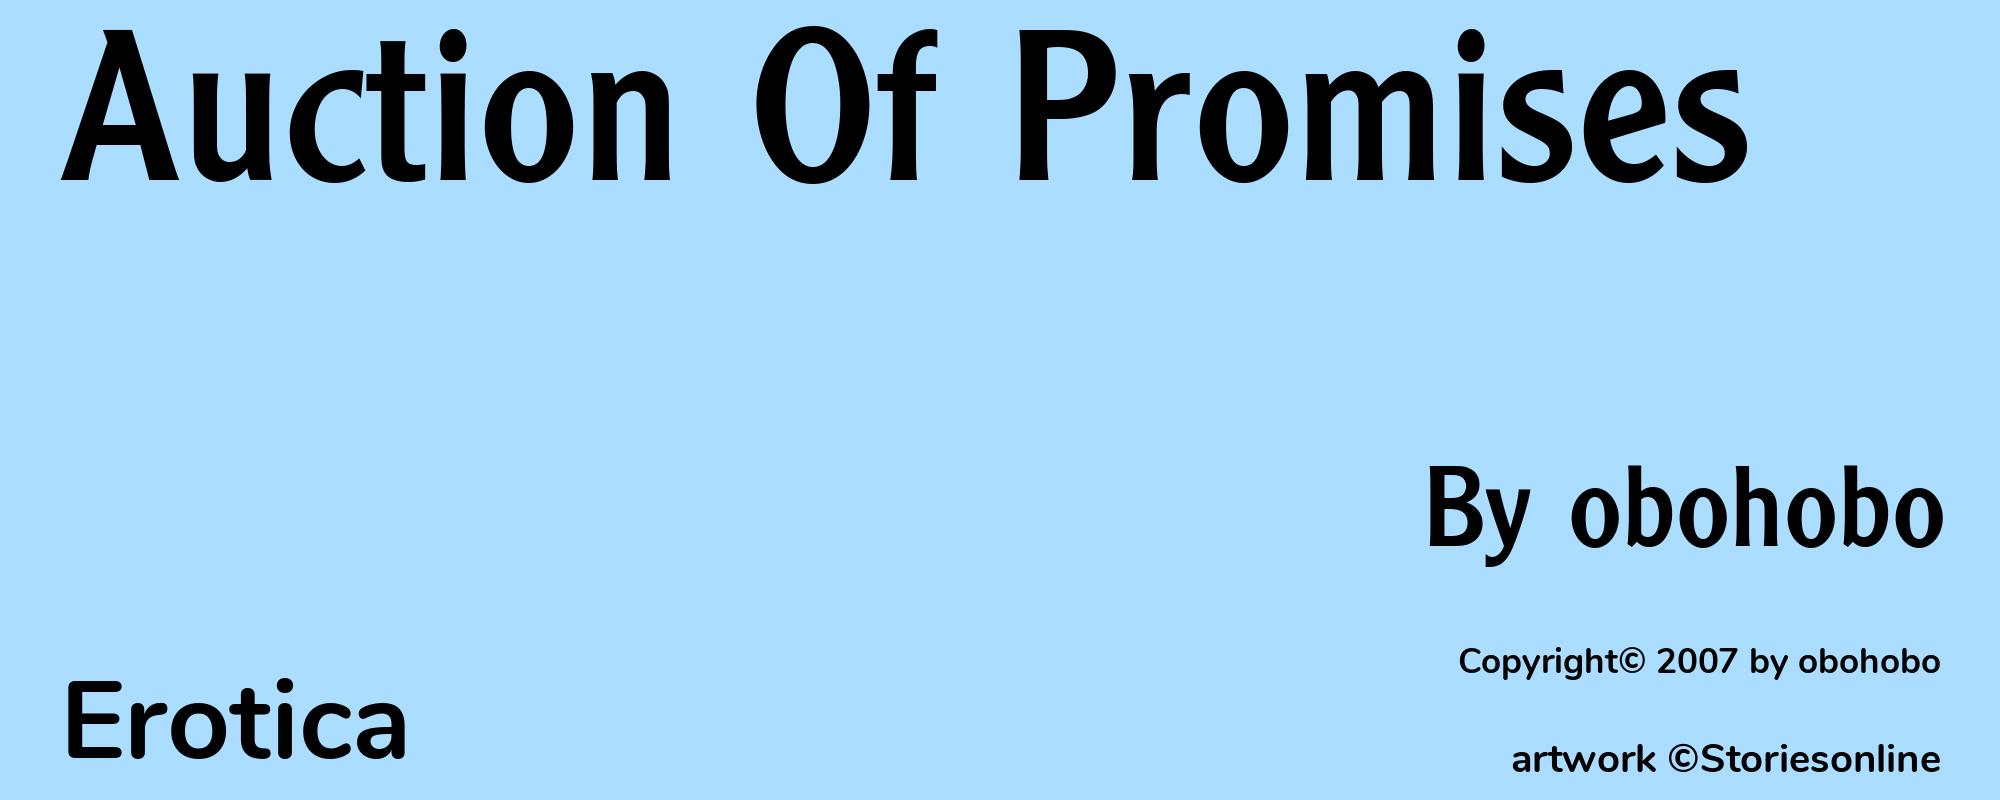 Auction Of Promises - Cover